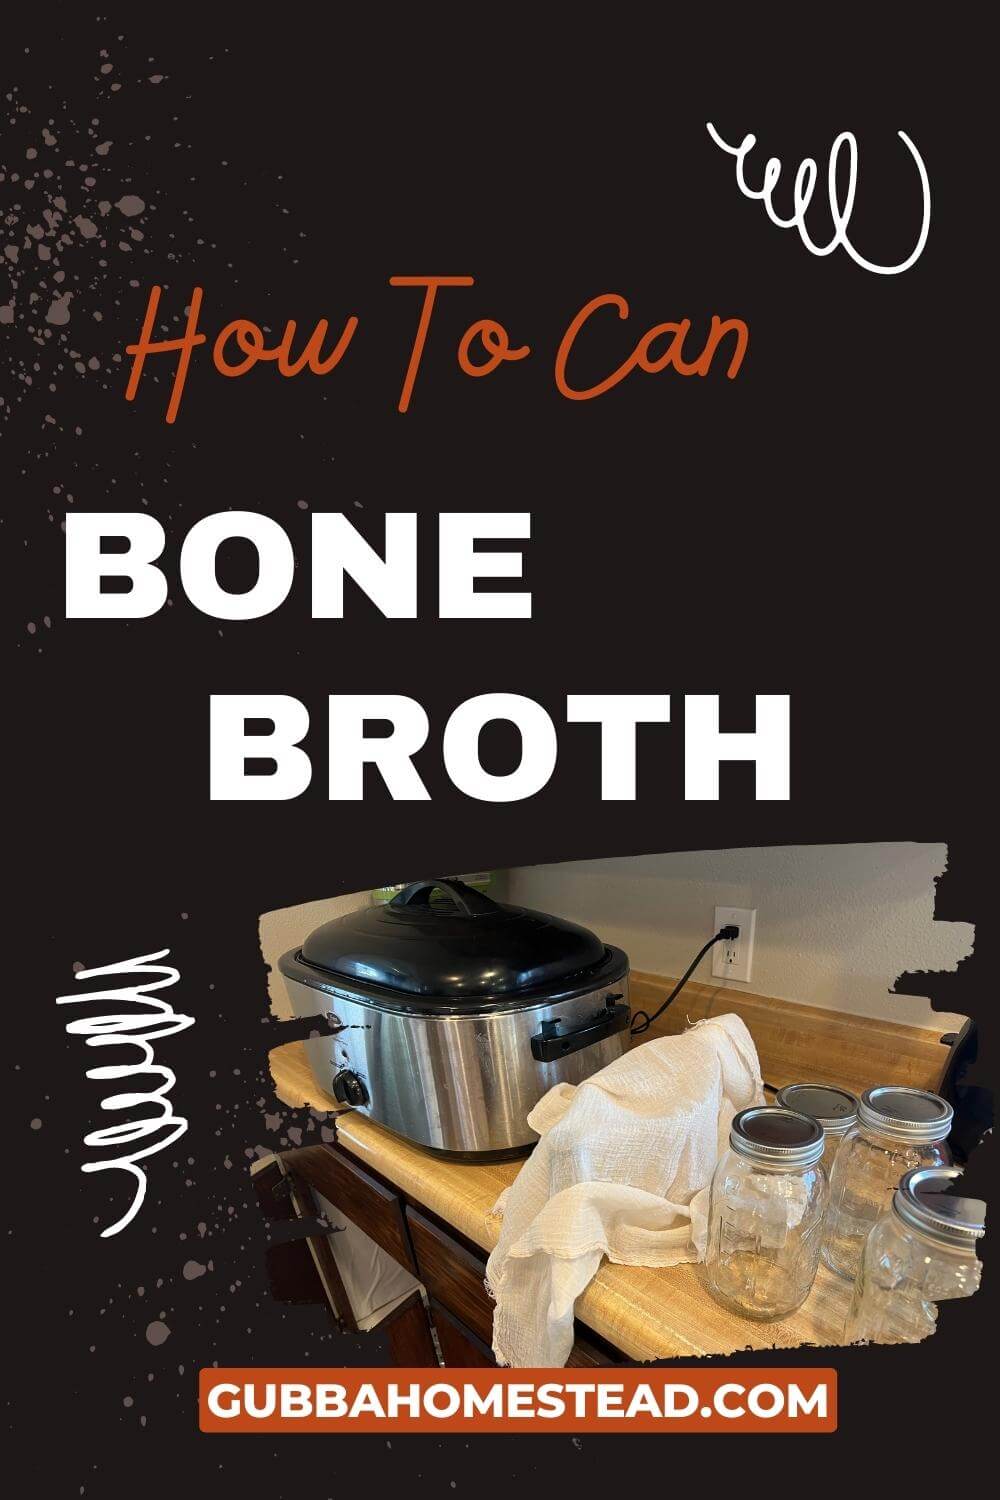 How To Can Bone Broth